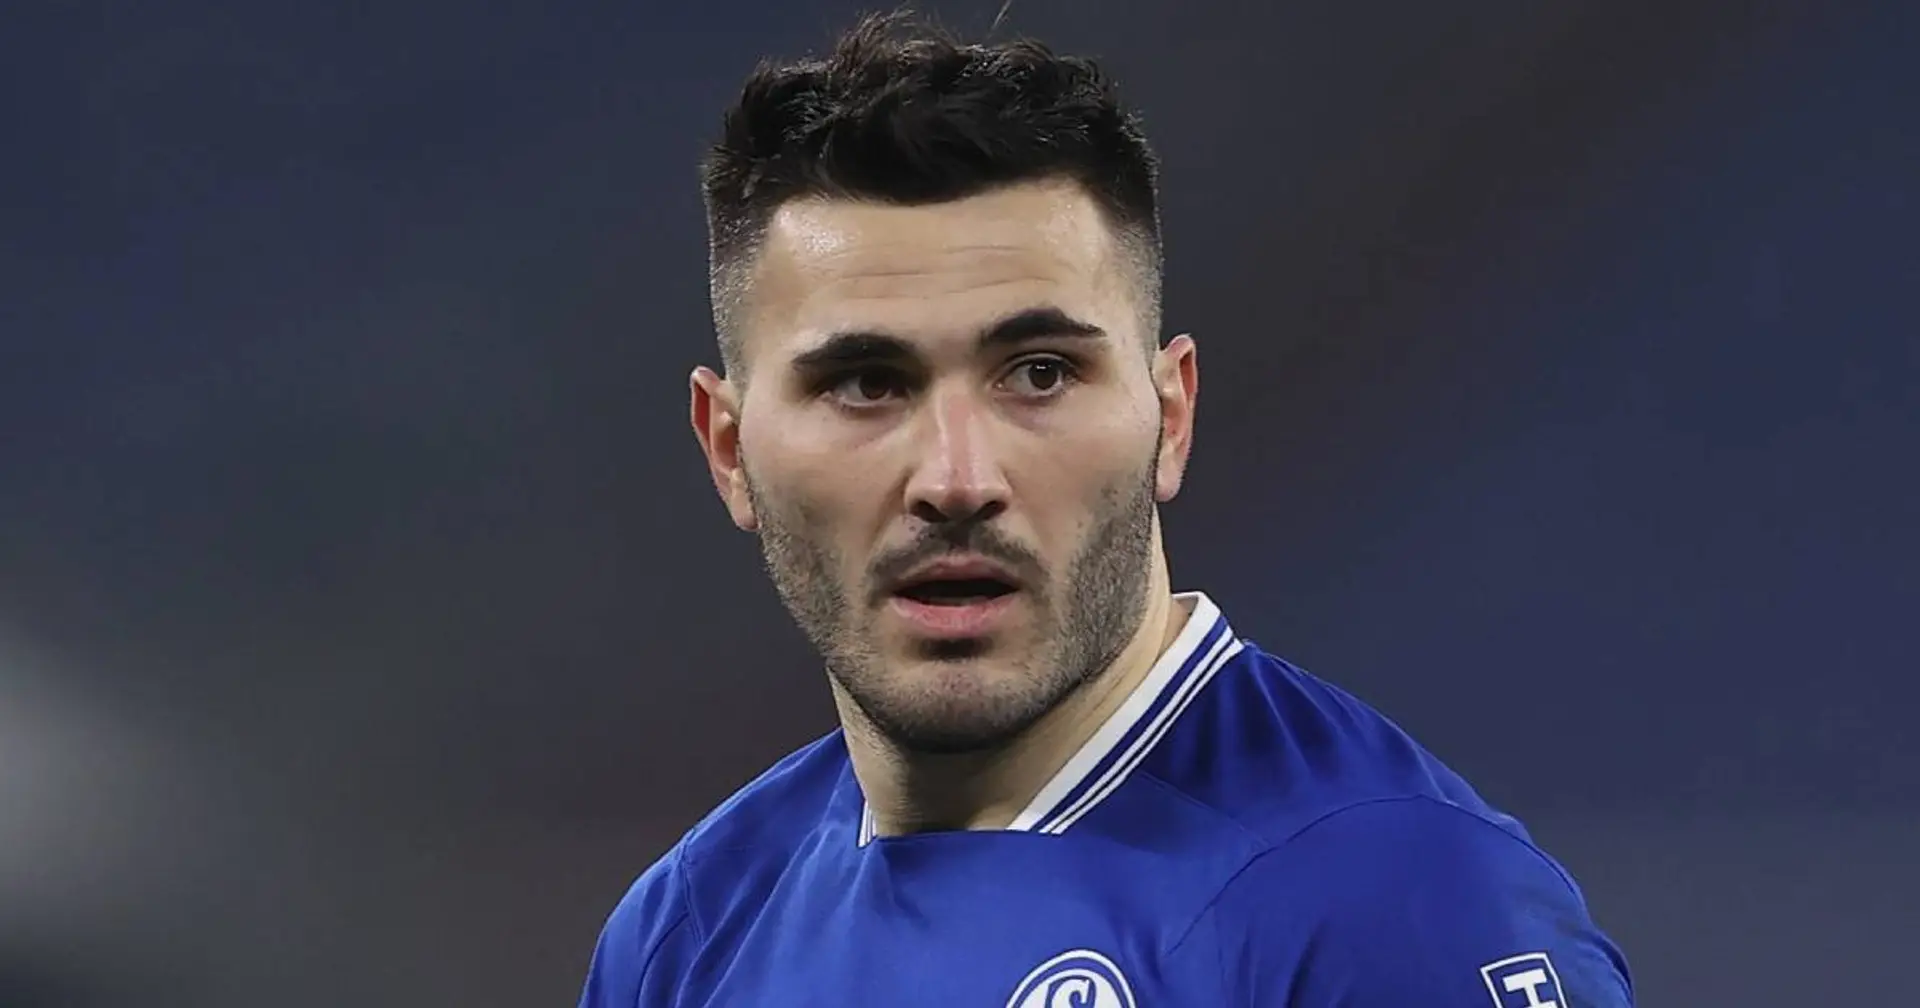 'It's our wish to keep him until the end of his career': Schalke sporting director Schneider on Kolasinac